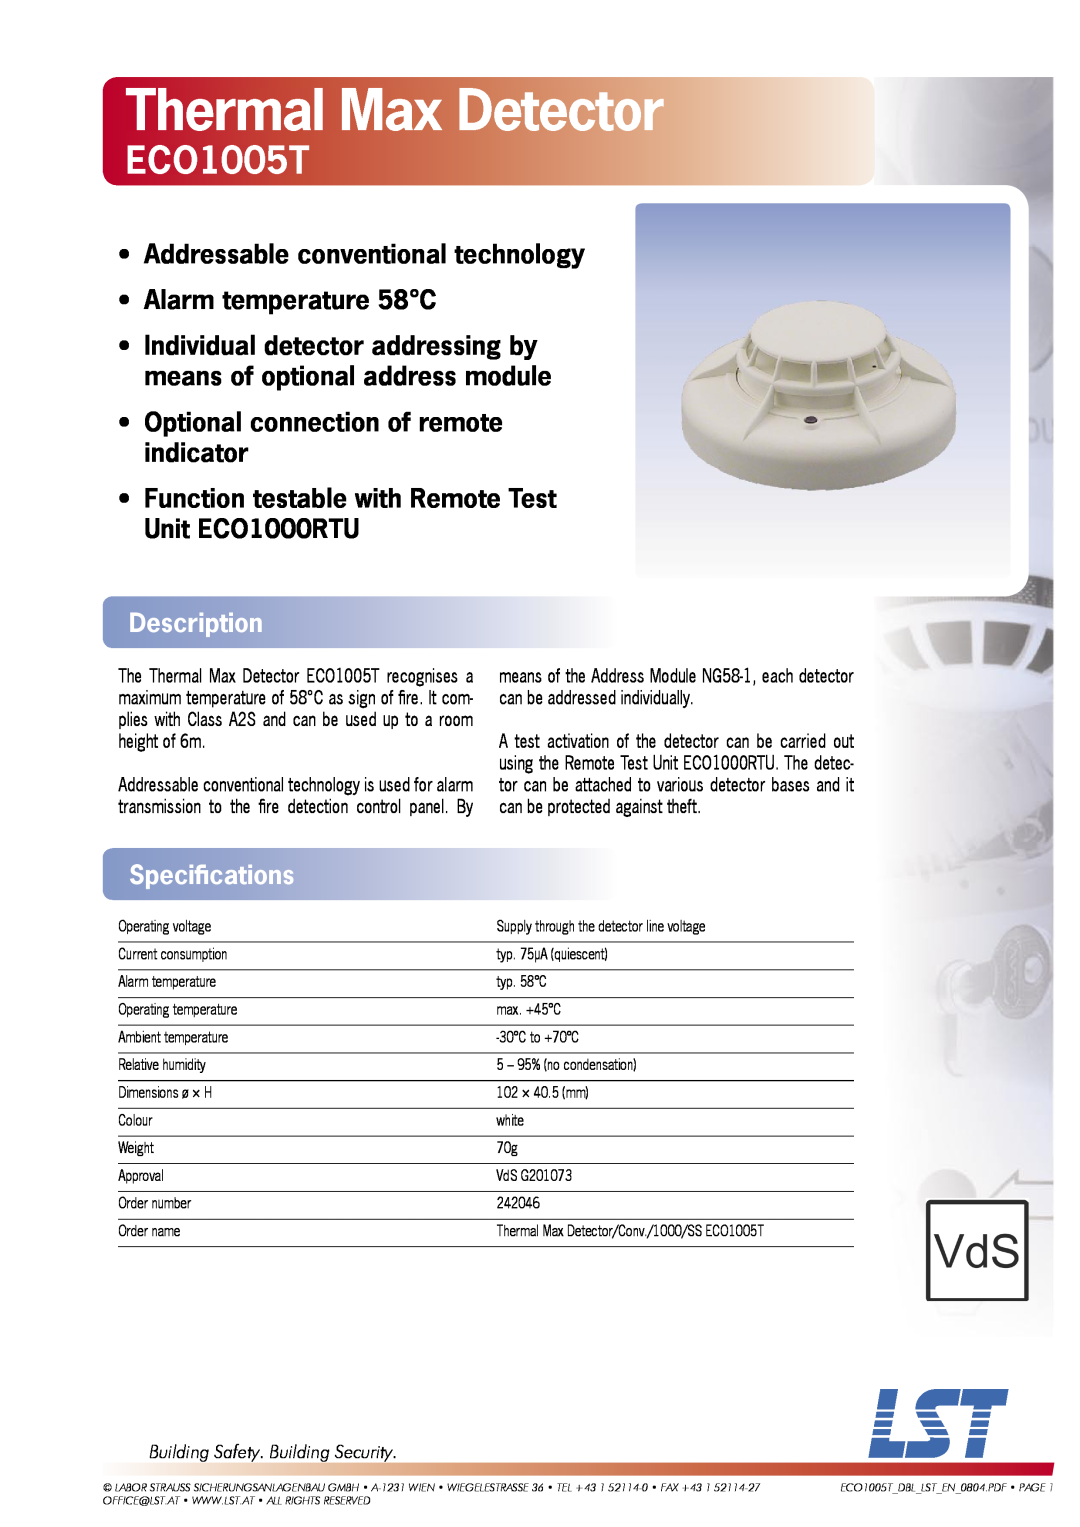 LST ECO1005T specifications Thermal Max Detector, Addressable conventional technology, Alarm temperature 58C, Description 